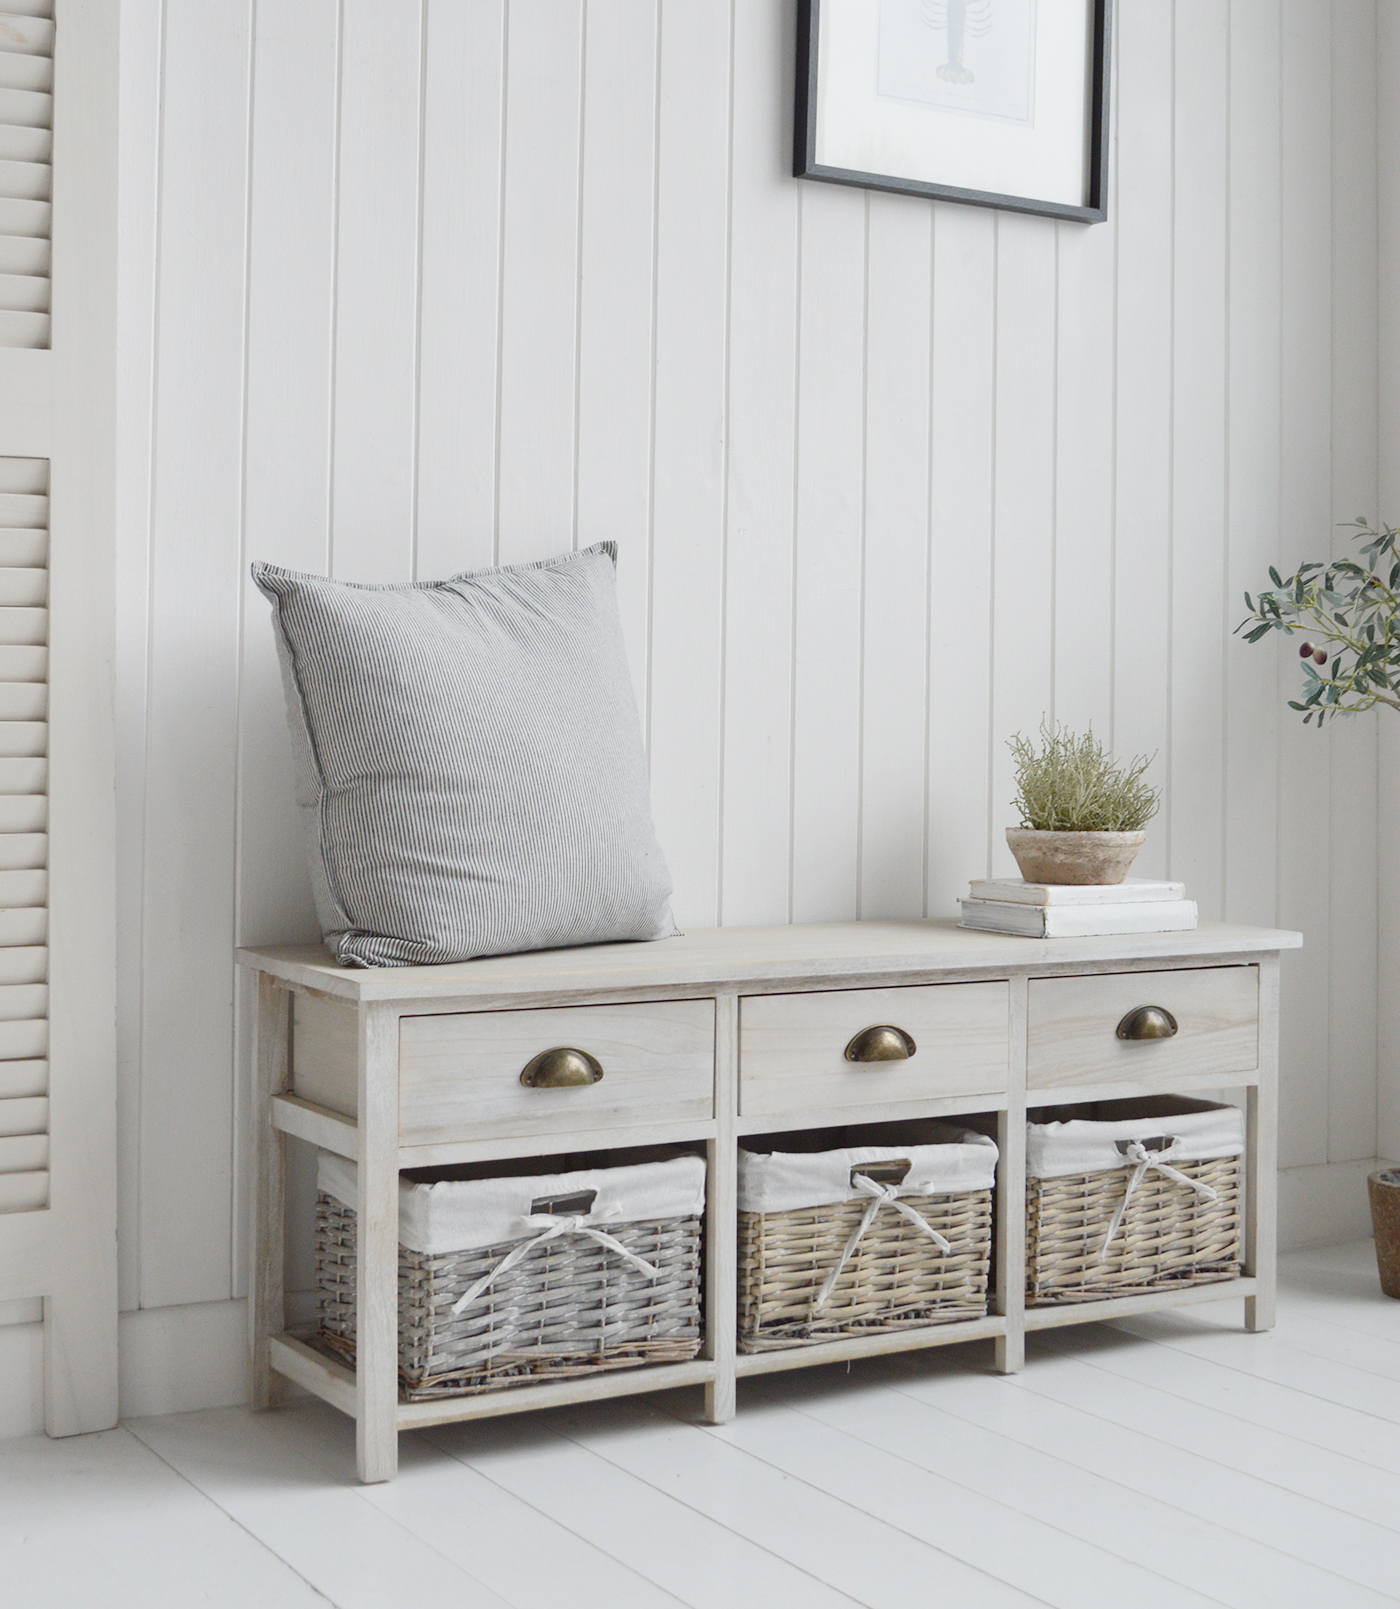 Dorset Storage Bench with 3 drawers and  baskets - New England Modern Farmhouse and Coastal Furniture and interiors